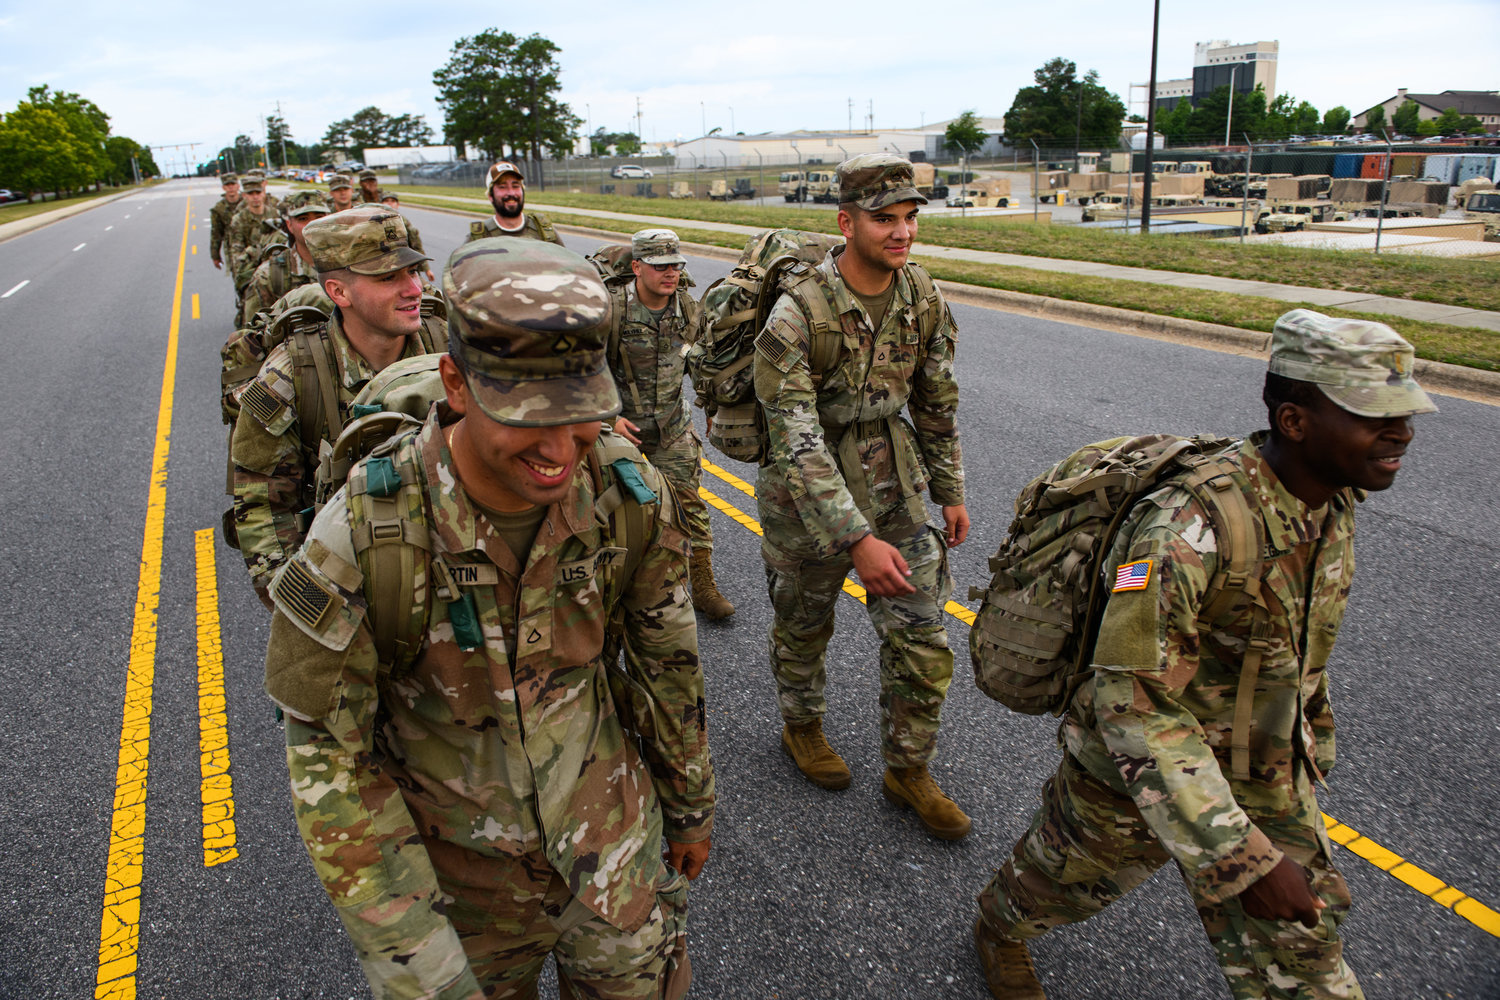 CALL OF DUTY: All American pride is on display as Army soldiers carry their rucksacks during early-morning physical training on Long Street on Fort Bragg. The 53,000-plus troops and their families who call the post home boost Fayetteville’s cultural diversity and its reputation worldwide.